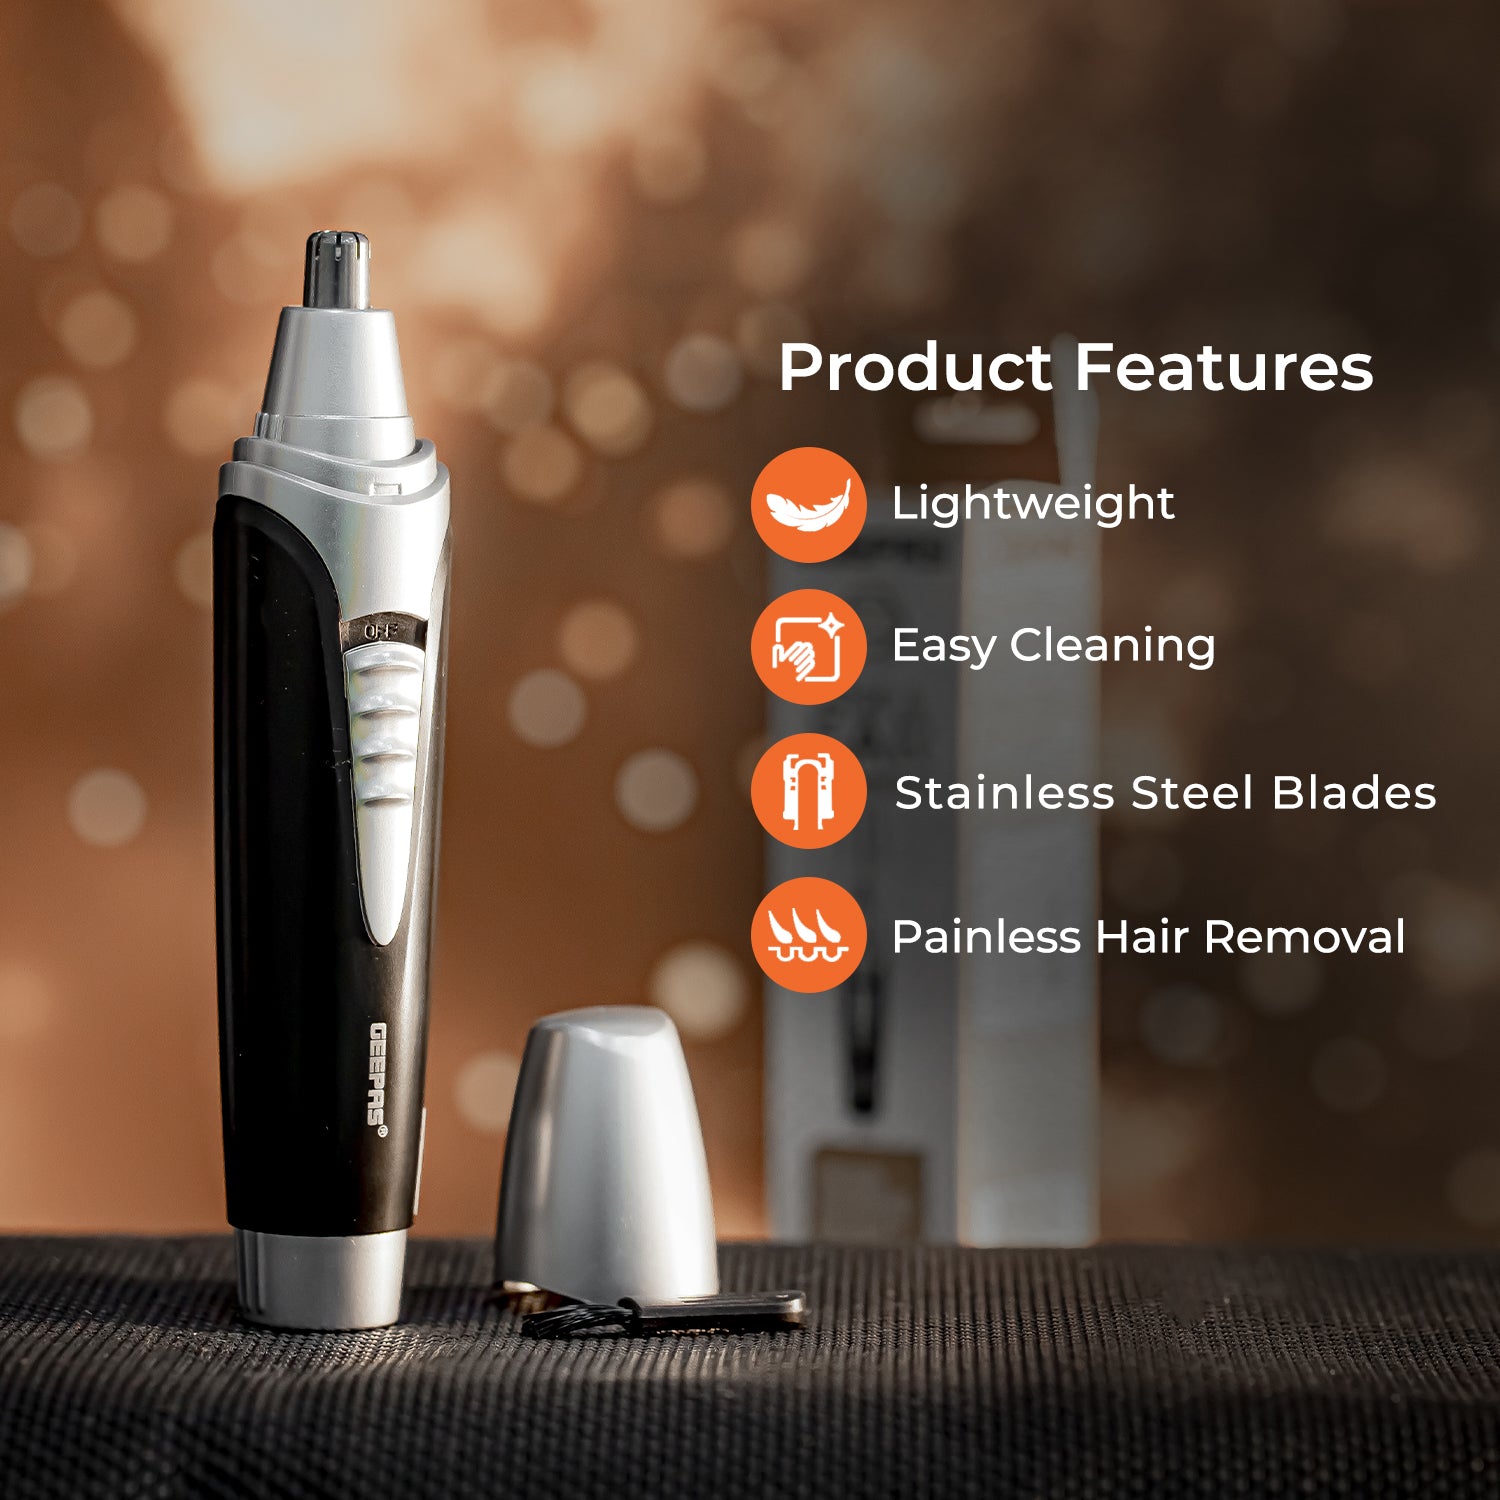 This image shows off the men's nose and ear hair trimmer on a canvas material, you can see shiny lights in the background. The image also shows off some of the most important product features such as being lightweight, easy cleaning, stainless steel blades and painless hair removal.